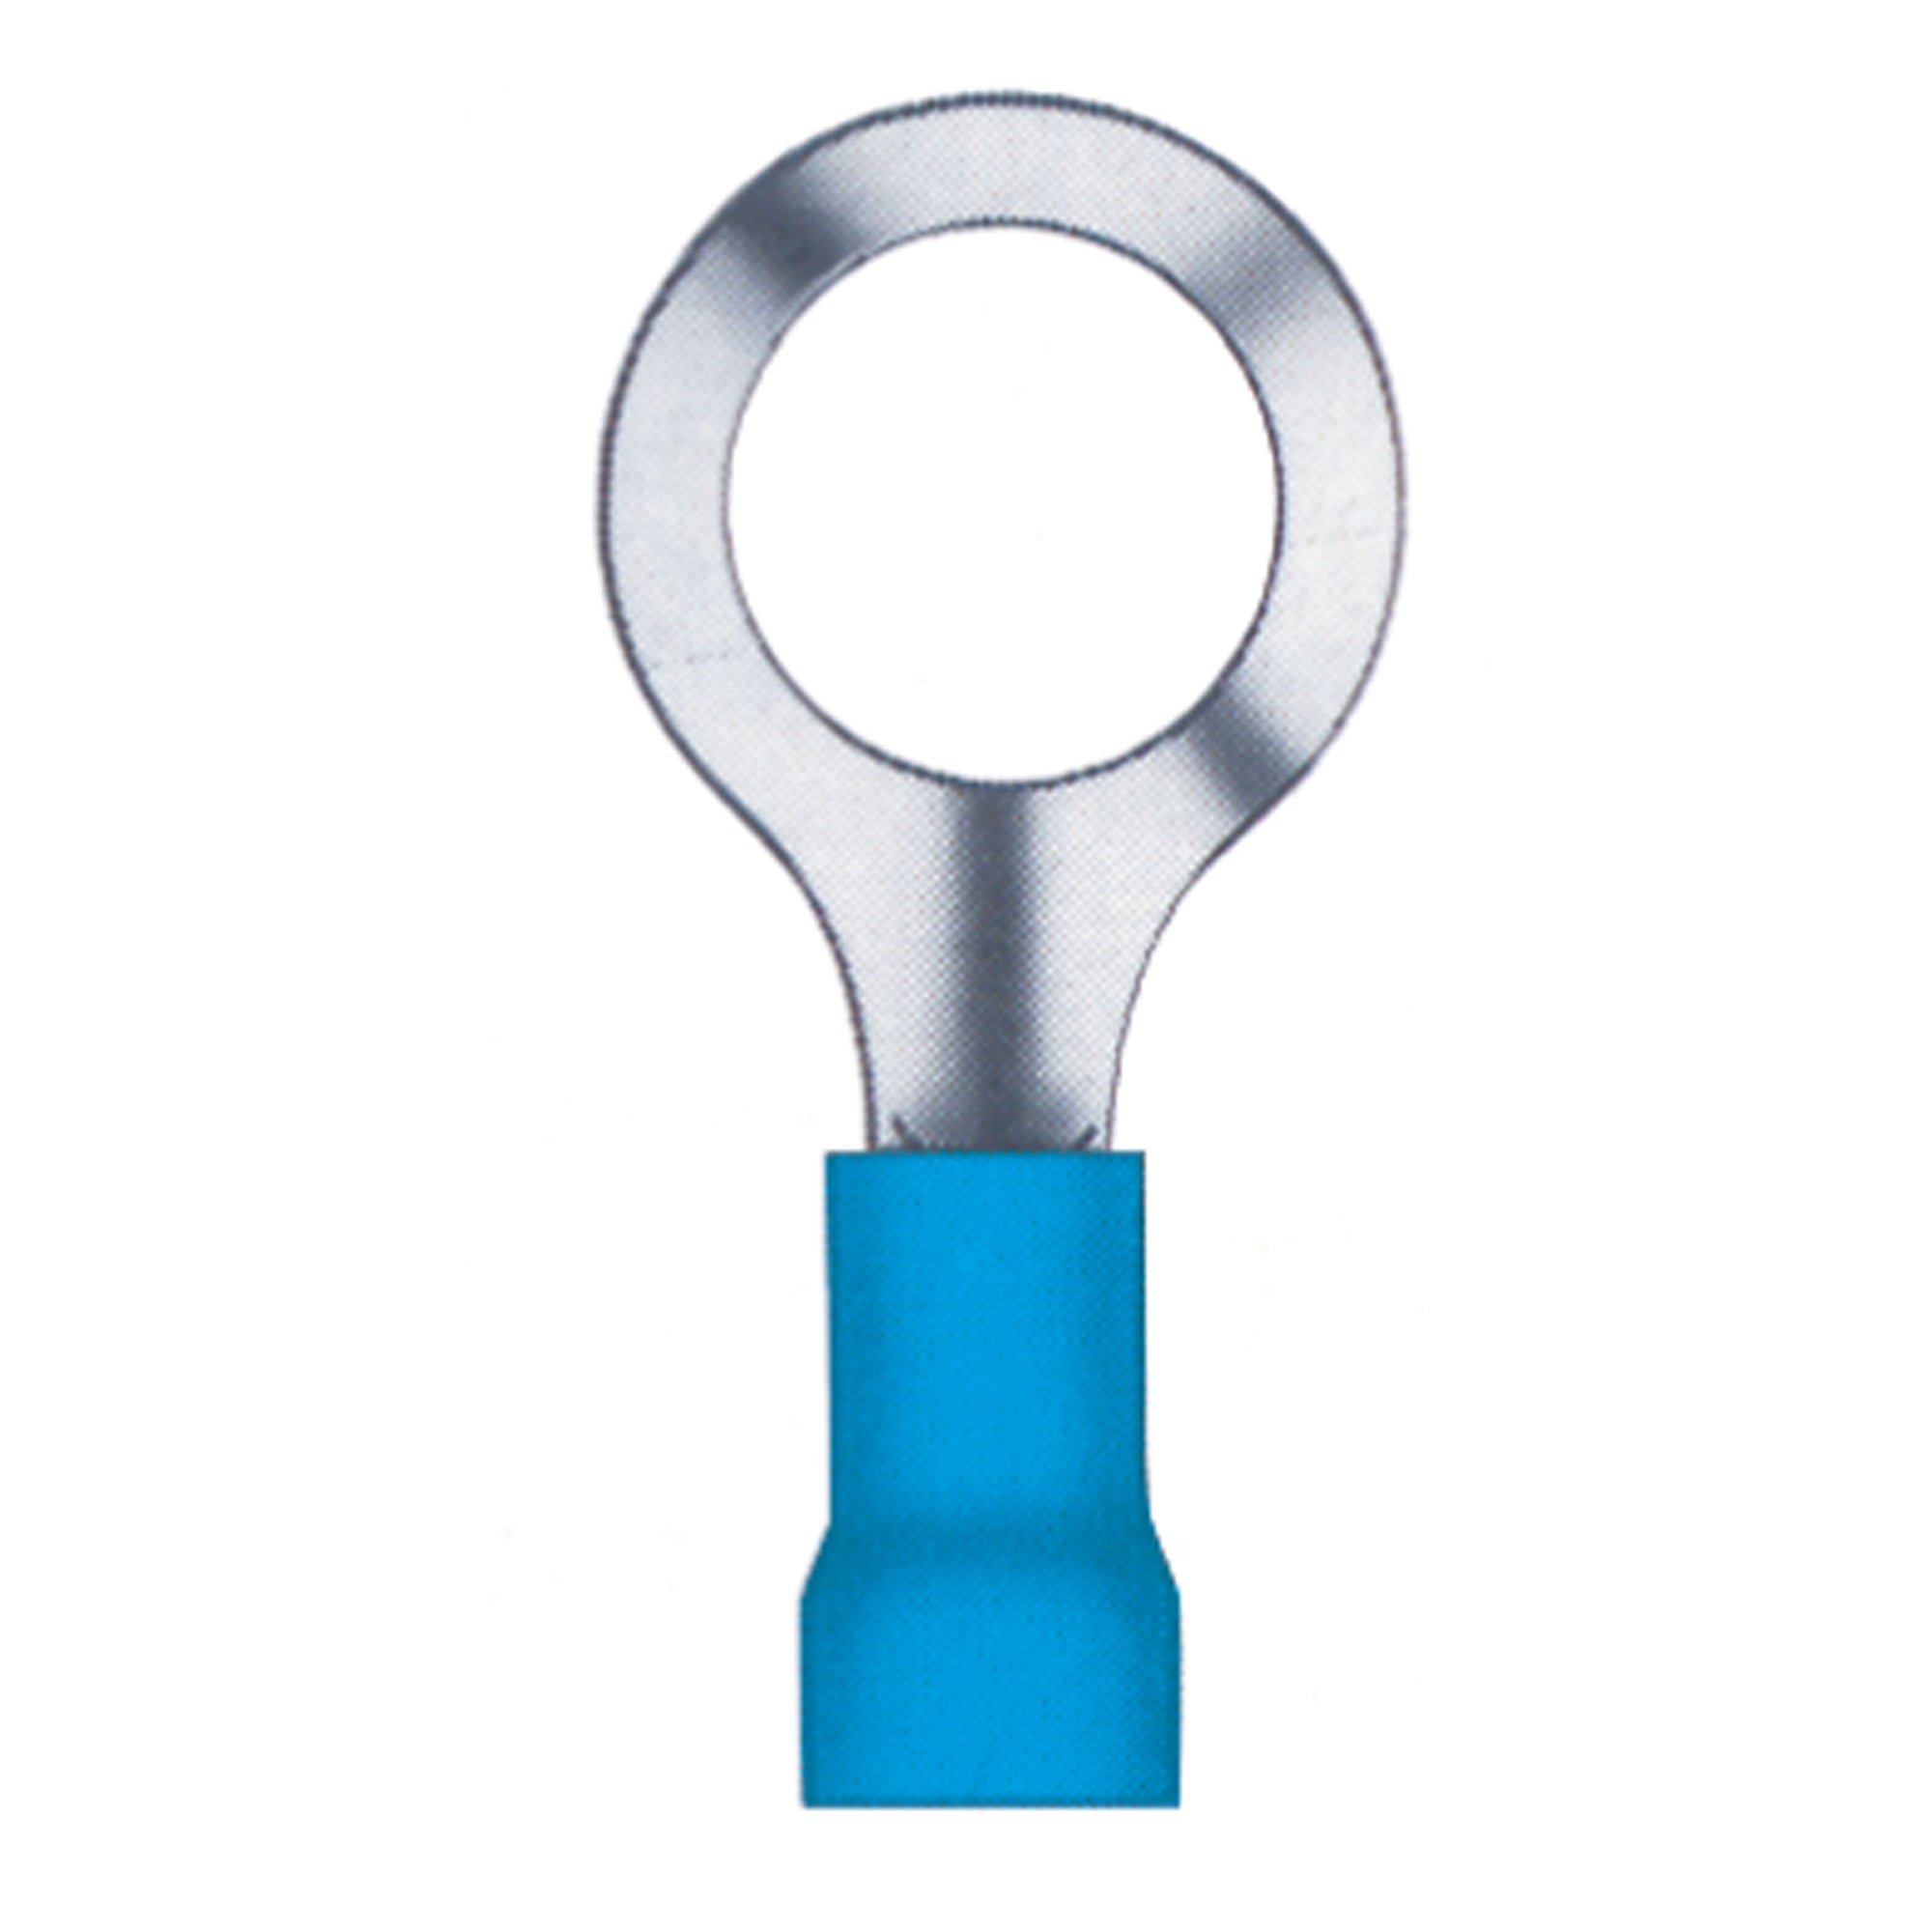 WirthCo 80344 Blue Insulated Ring Terminal - 1/4 in. Stud Size, Pack of 100